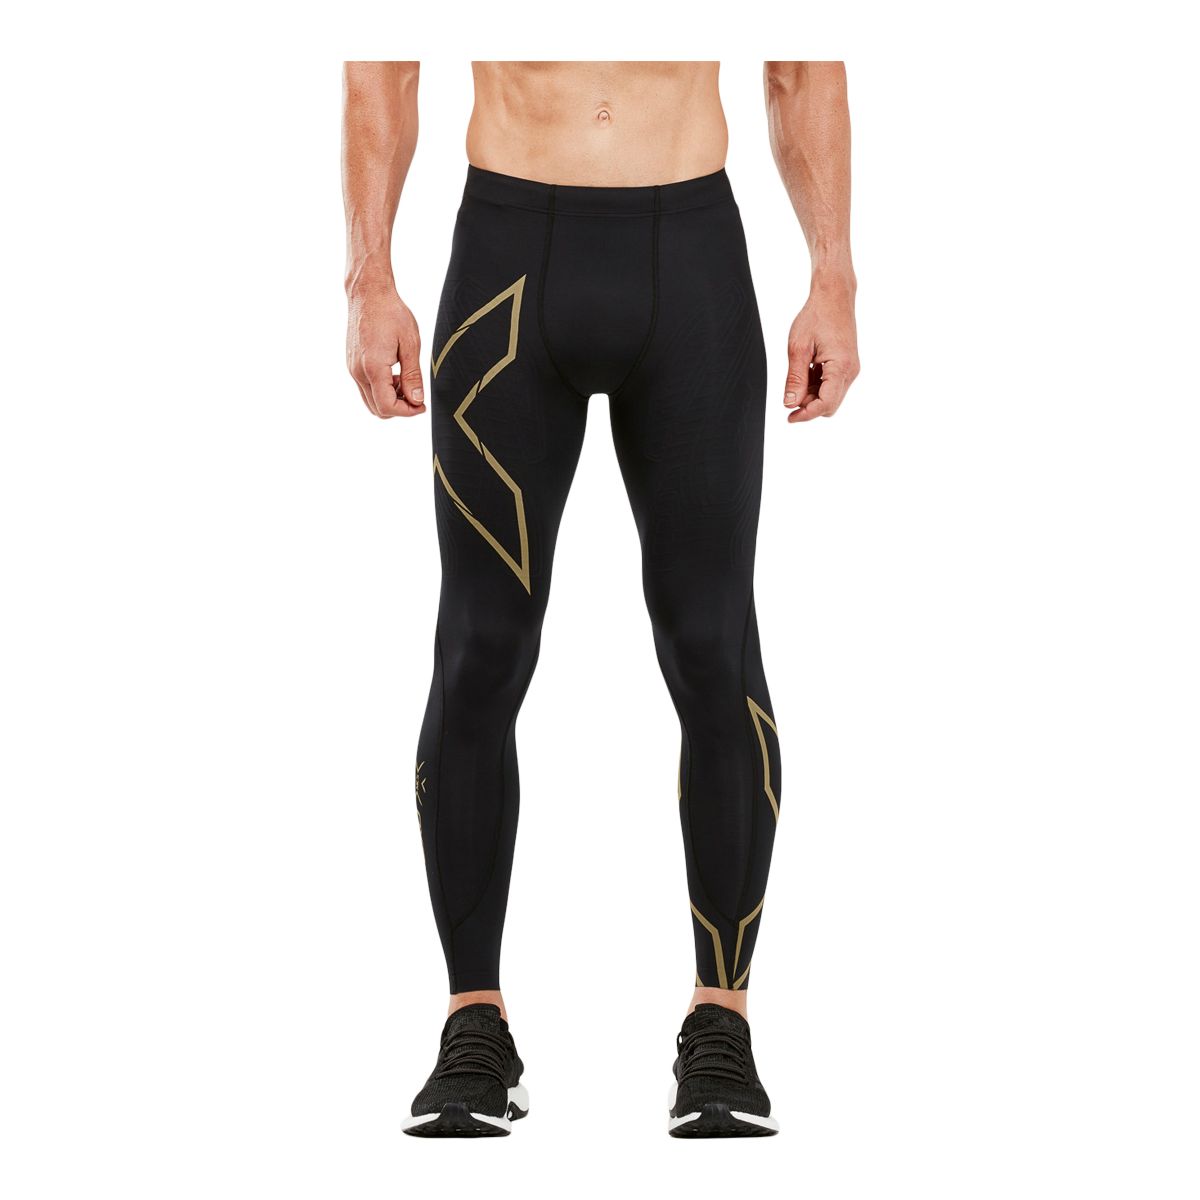 Image of 2XU Men's Compression Running Tights